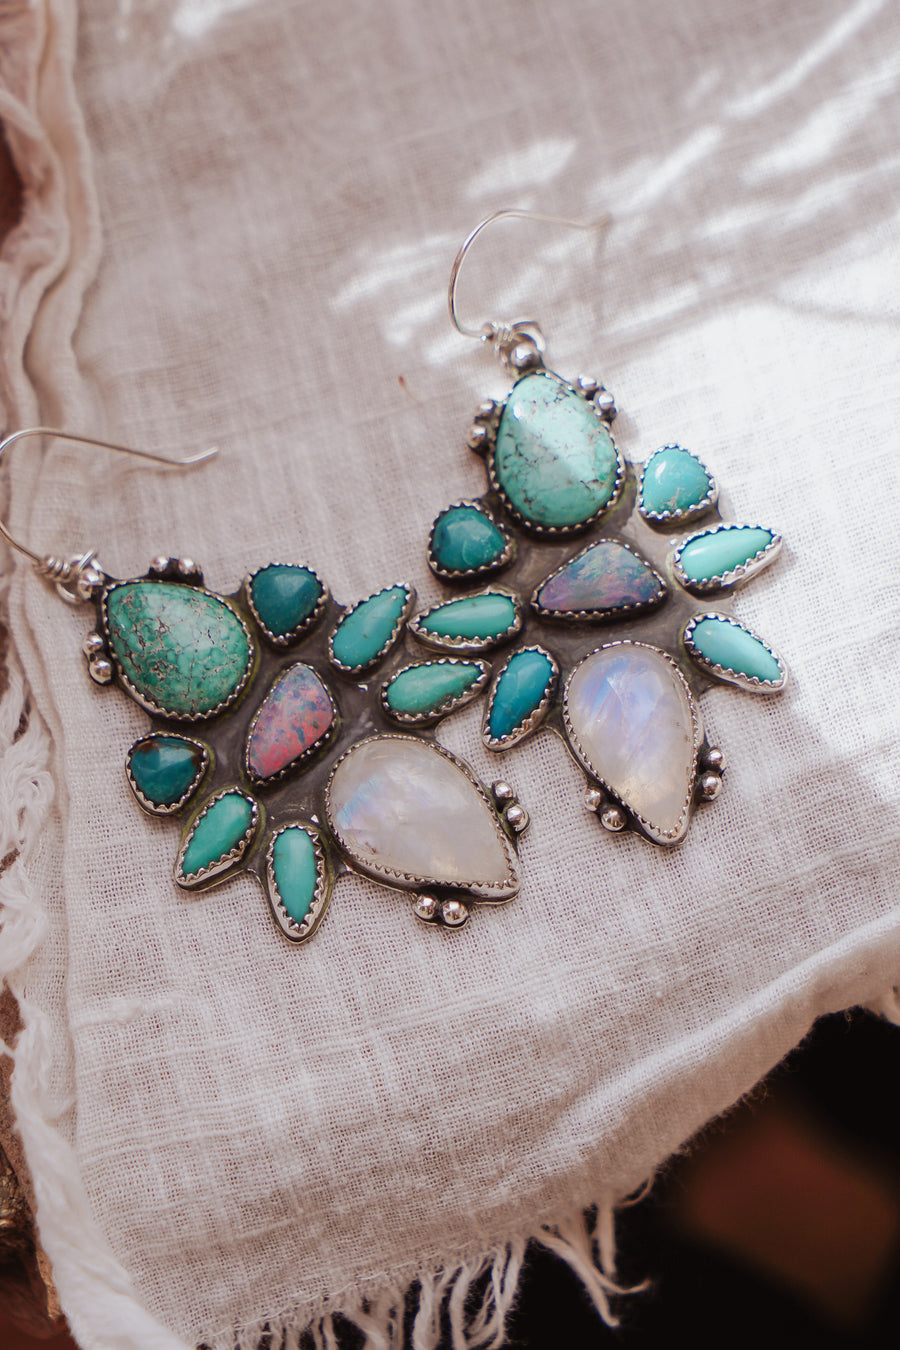 Statement Earrings in Moonstone, Campitos, Boulder Opal, Hubei, and Variscite Turquoise